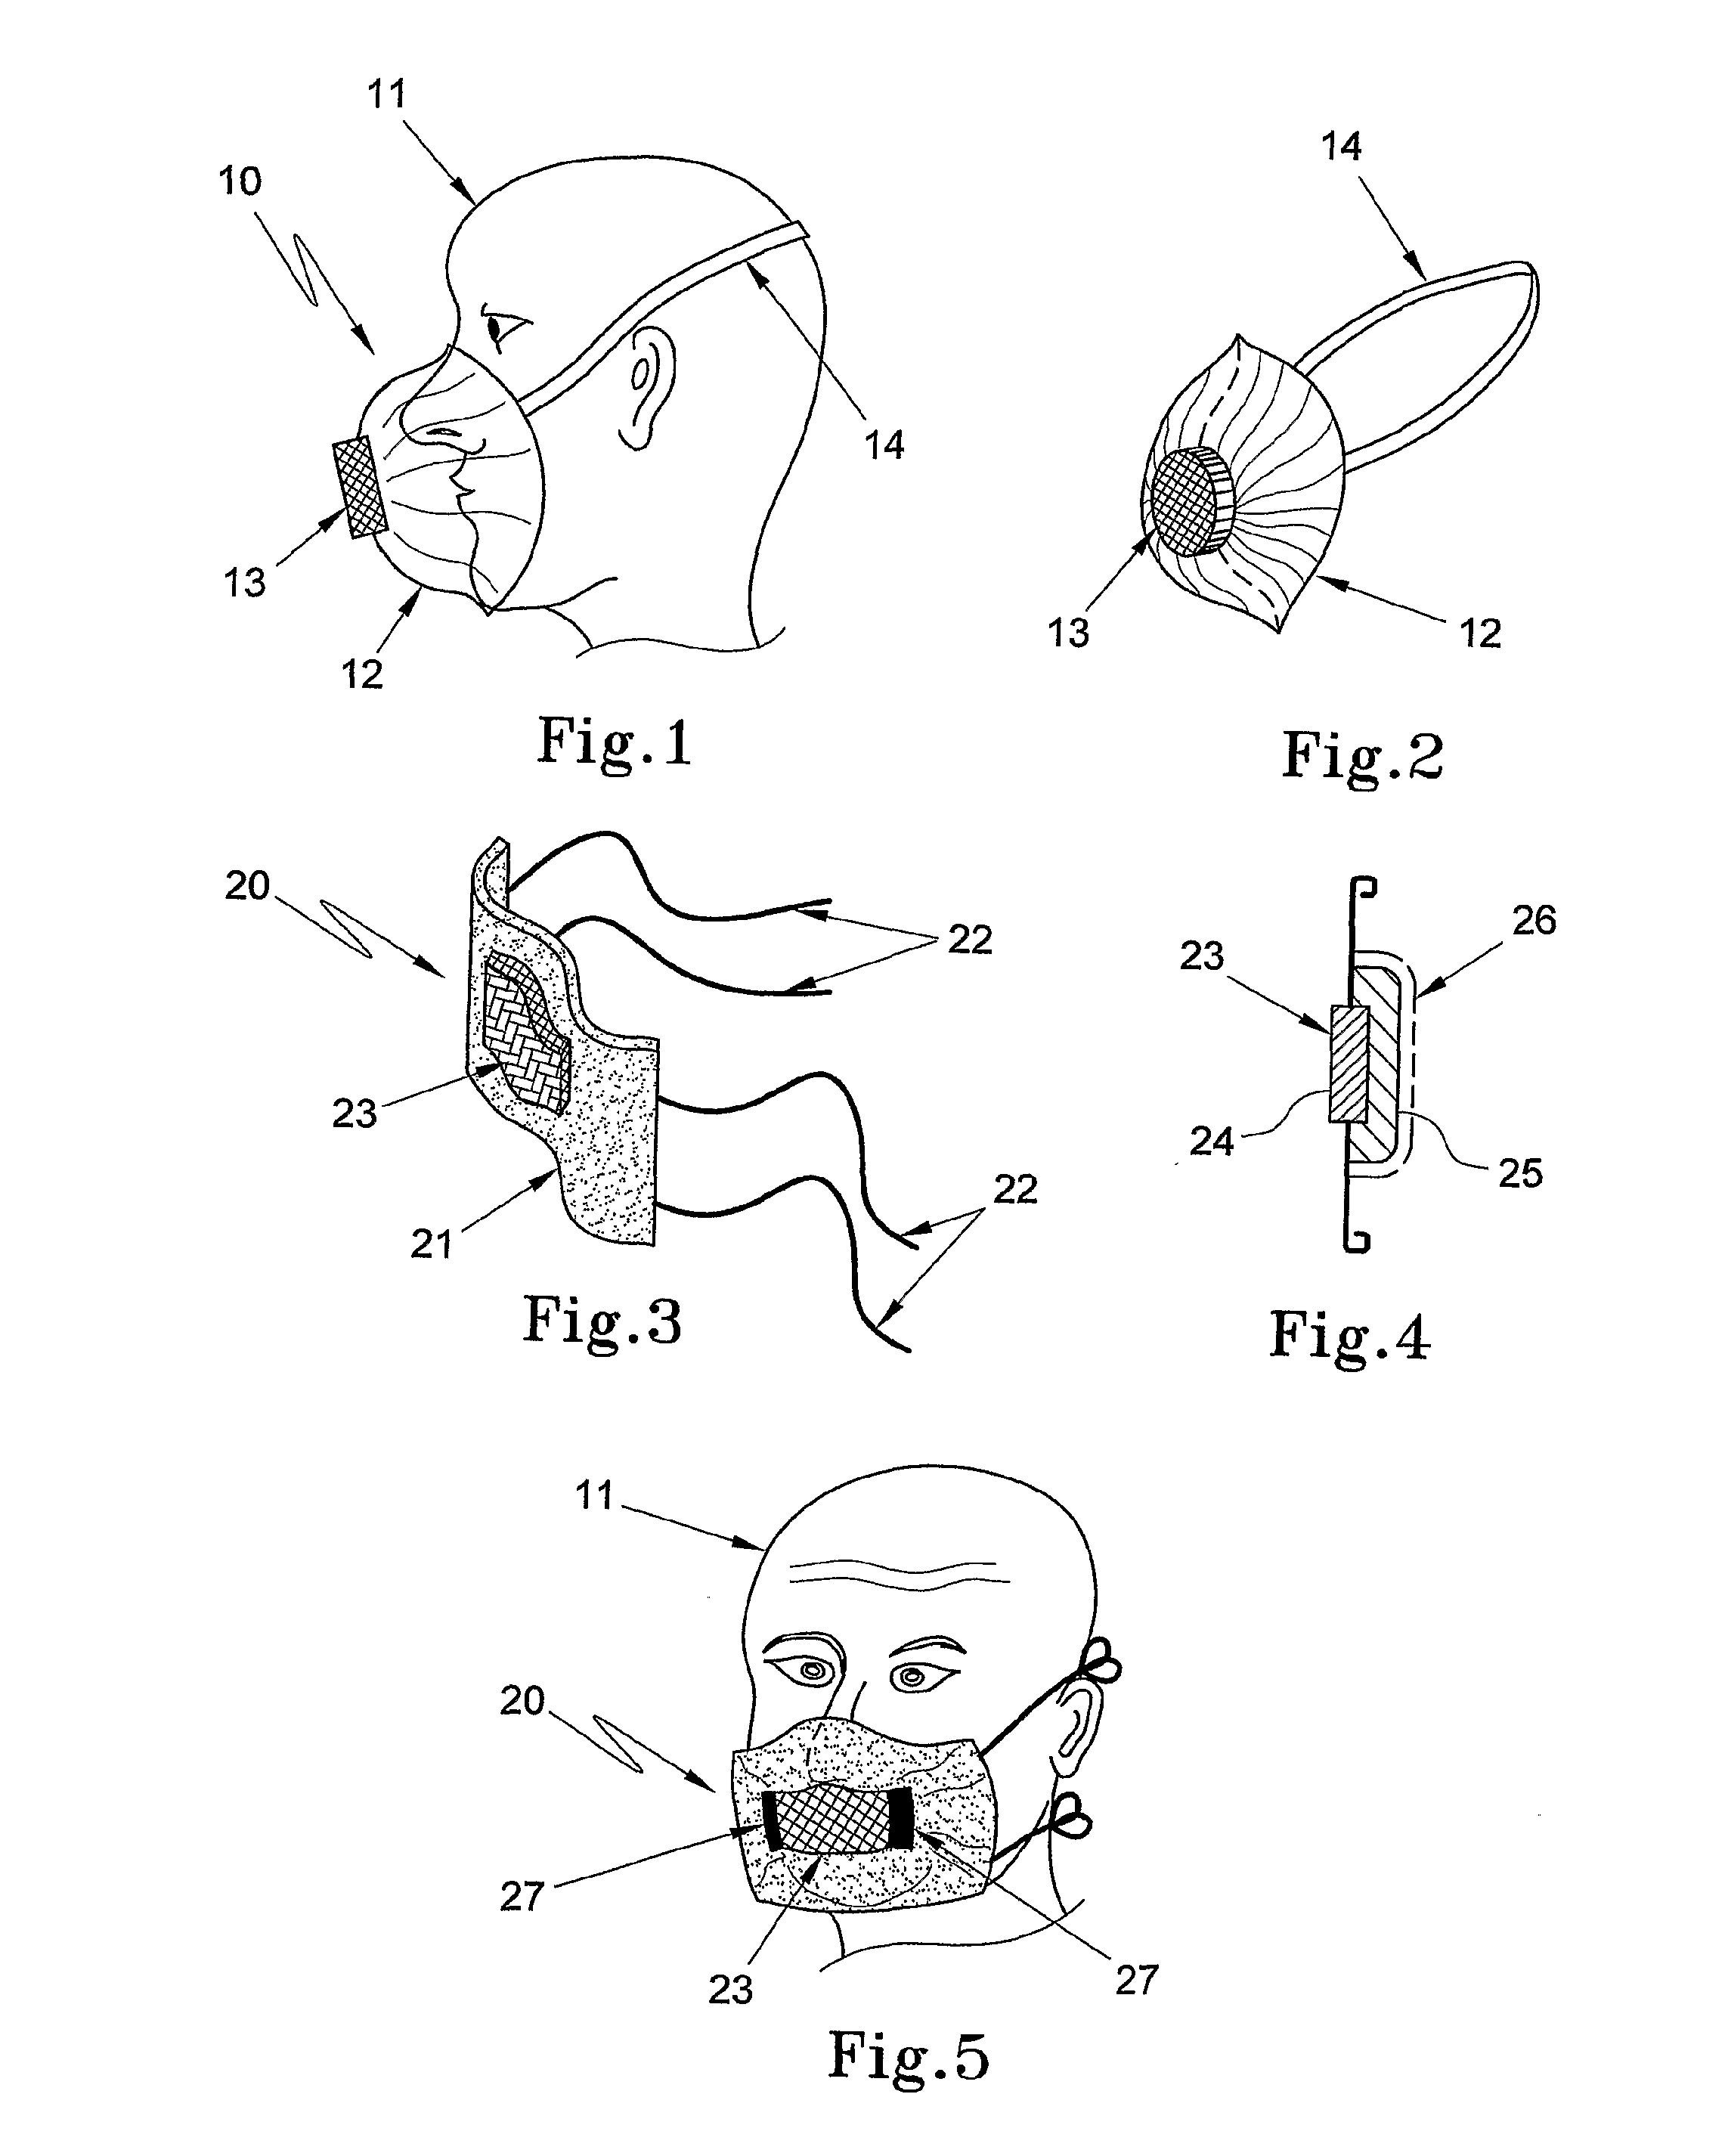 Collection Device for Sampling Exhaled Airstreams